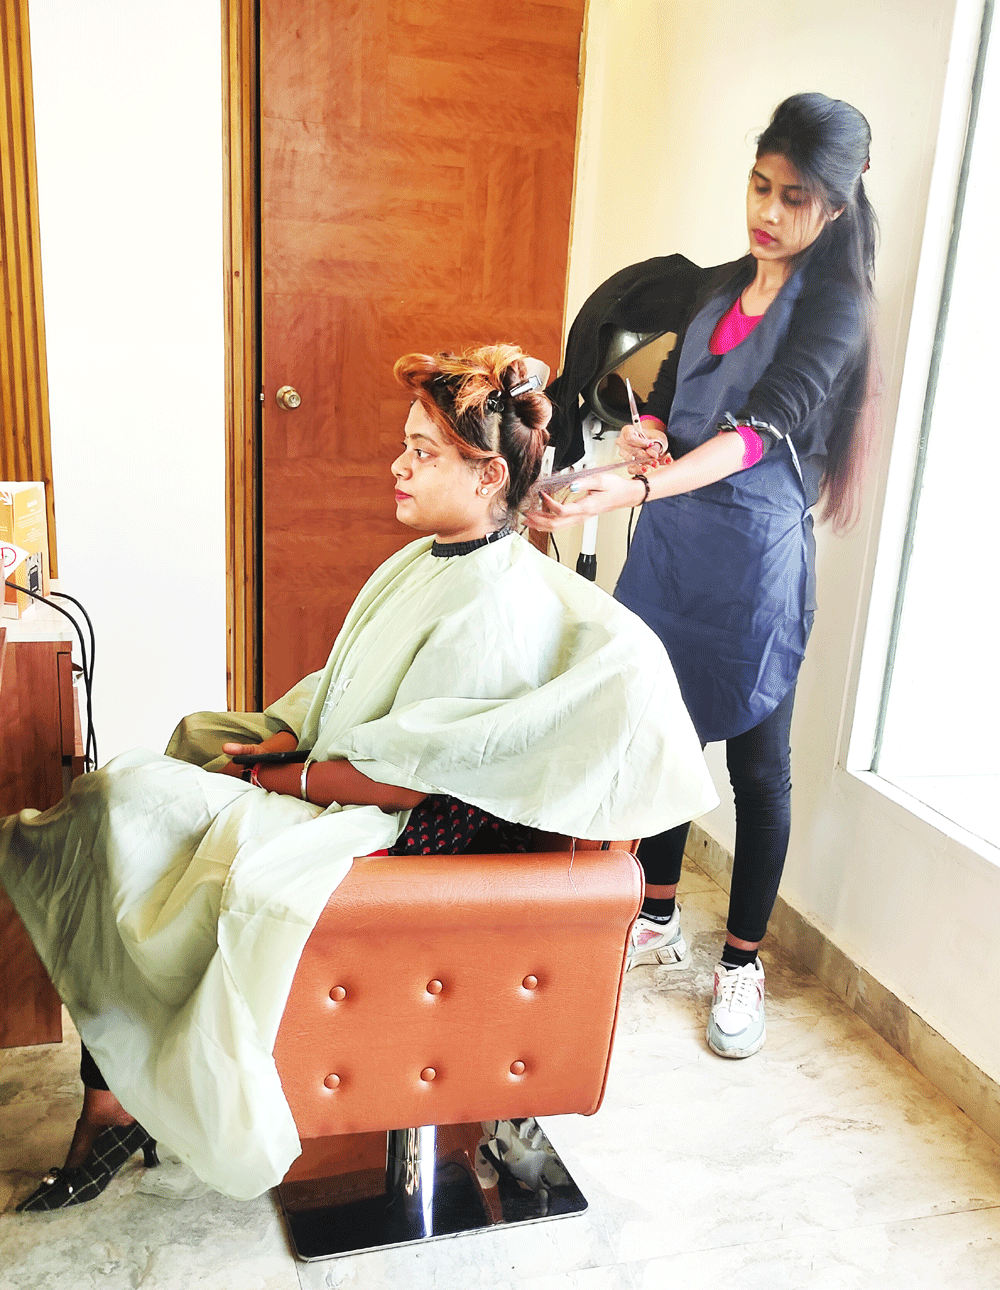 The Hair Company in Varanasi, we would like to remind you of some basic salon etiquette.